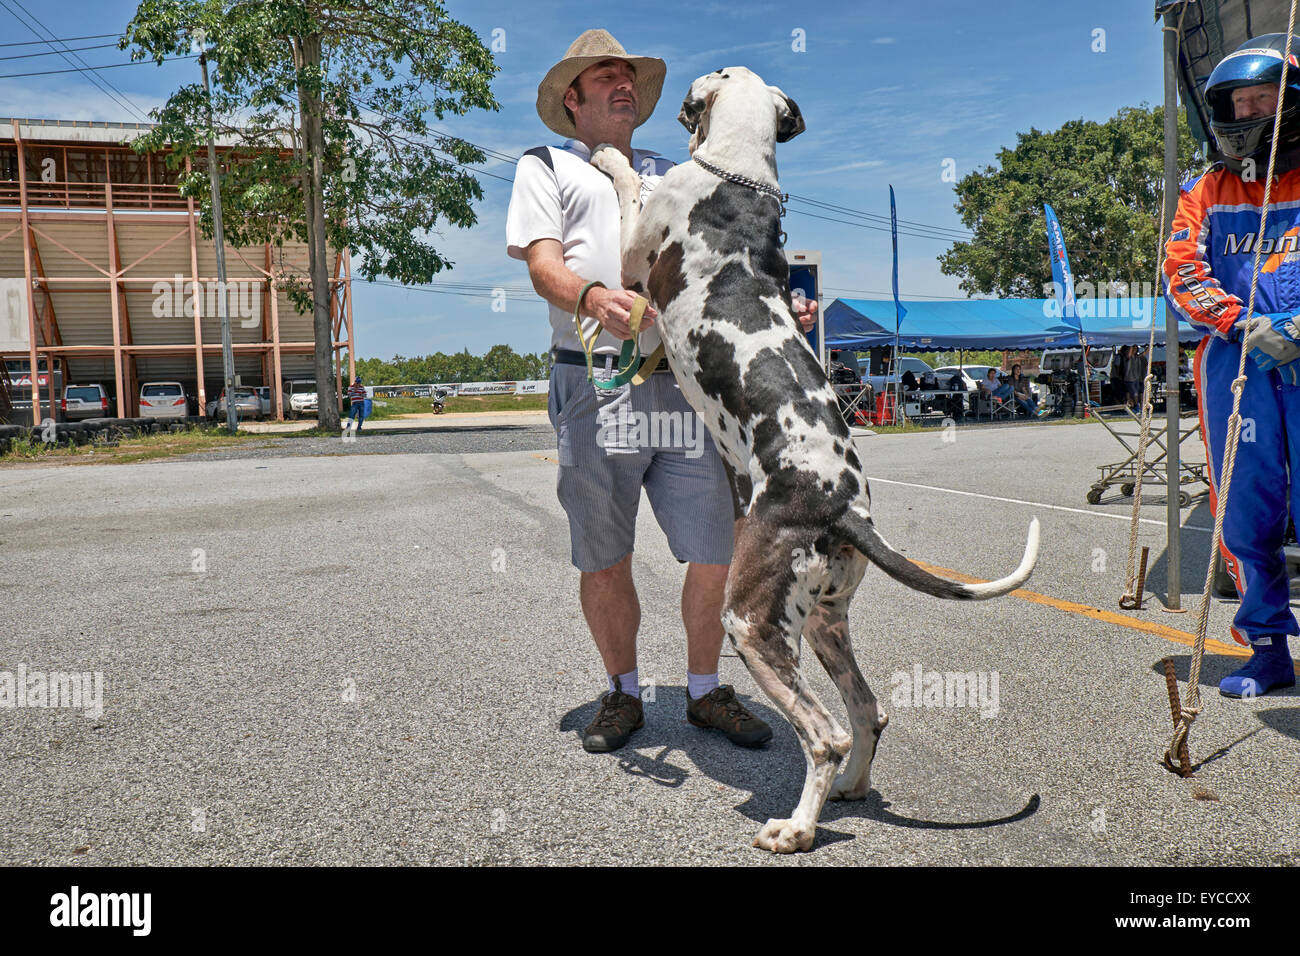 Great Dane Harlequin weighing 65 kilos and standing 2 metres tall affectionately greeting owner. Stock Photo